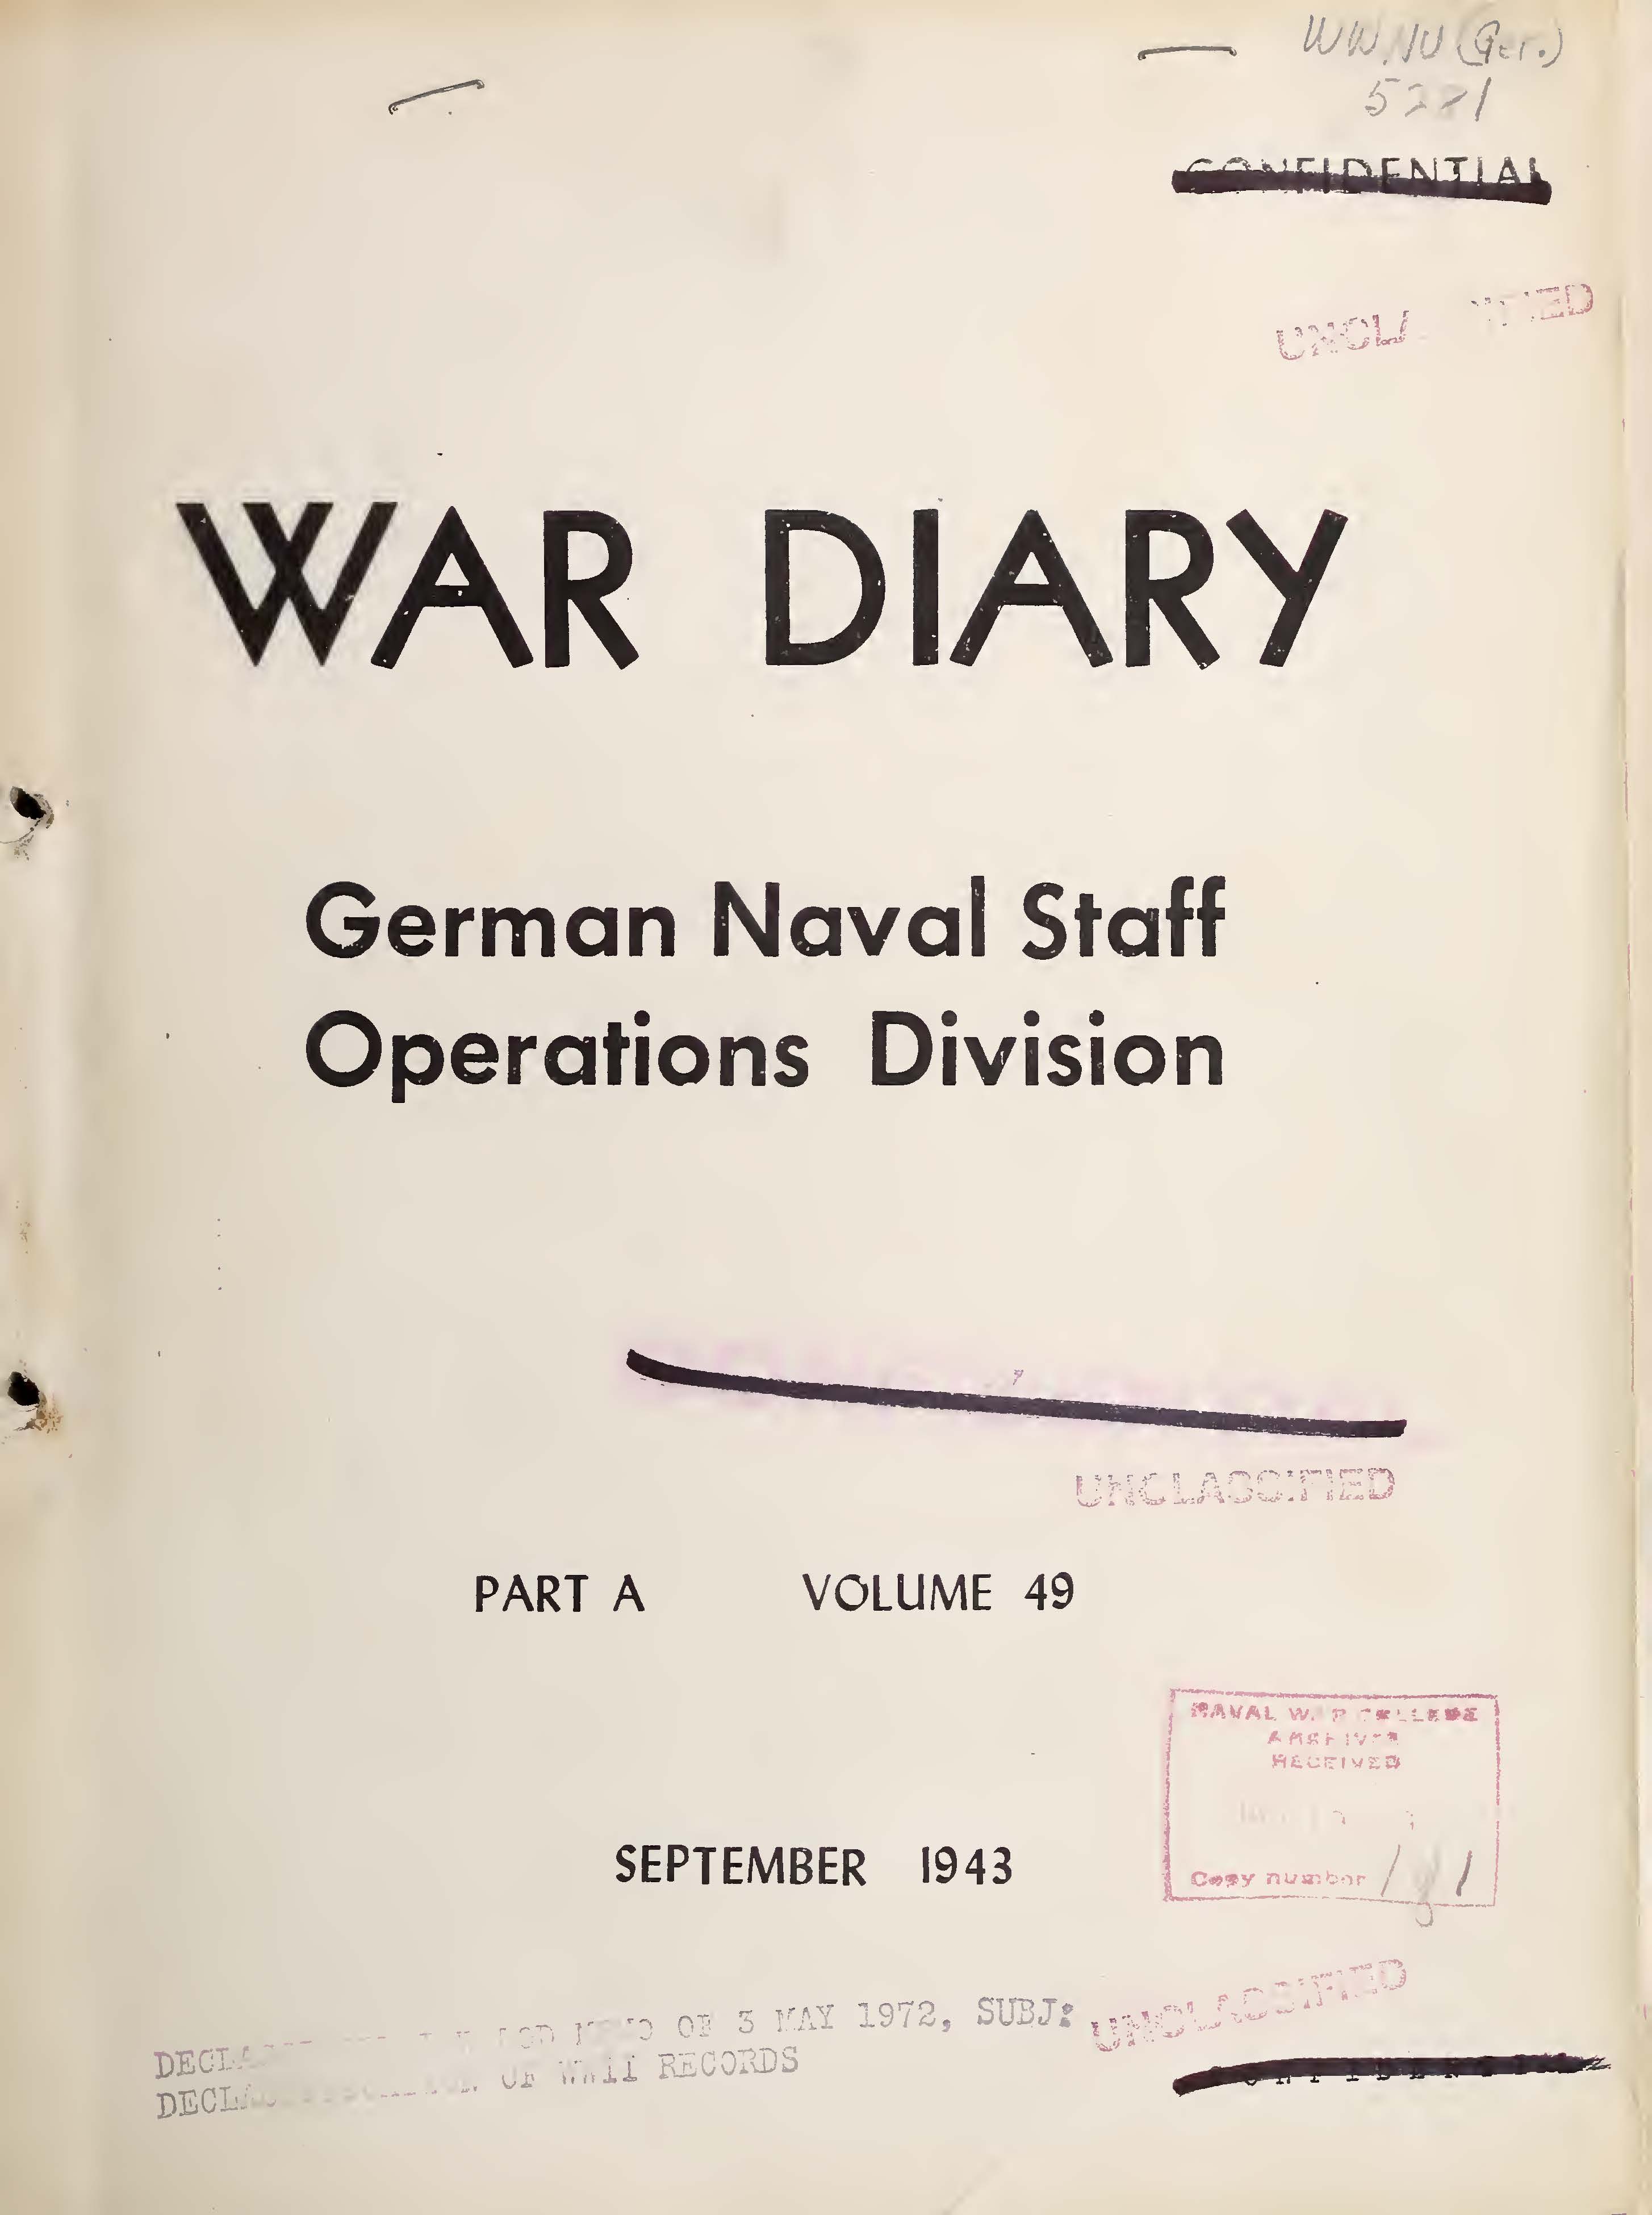 War Diary of German Naval Staff (Operations Division) Part A, Volume 49, September 1943